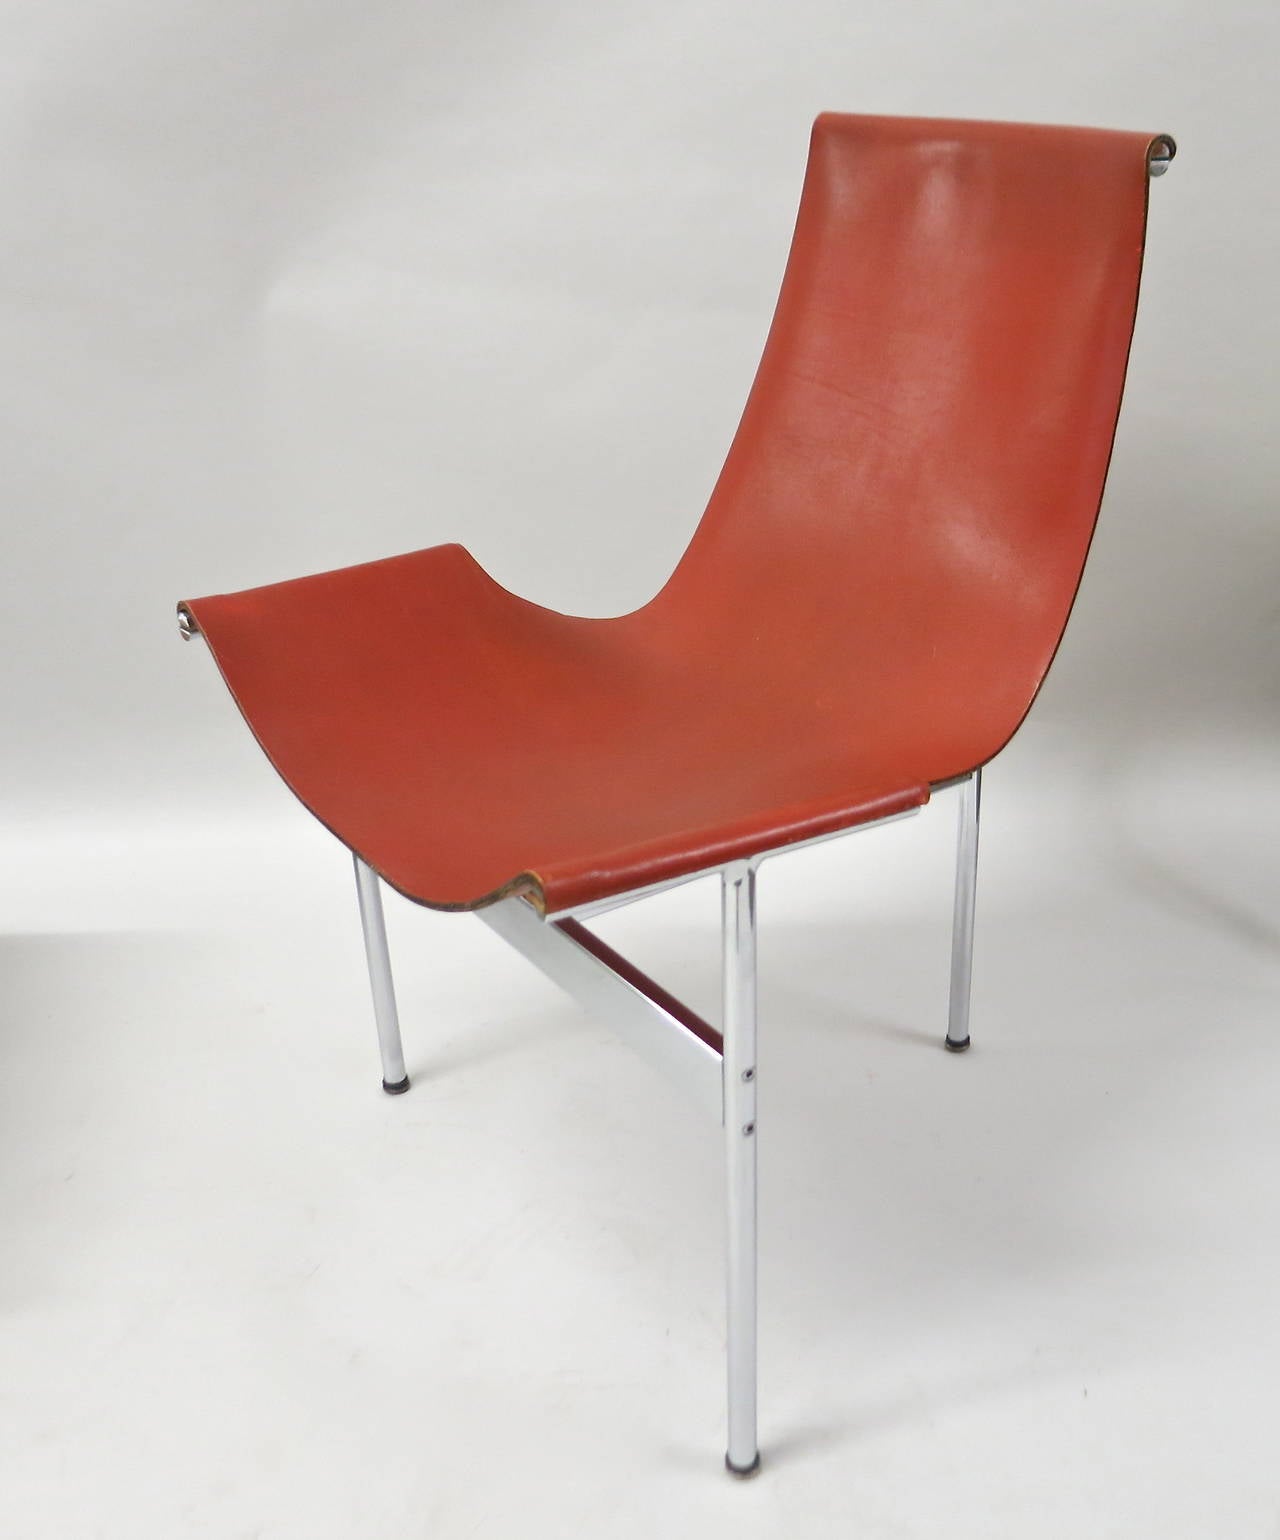 Mid-Century Modern Ten T-Chairs in Original Condition by Katavolos, Kelly, Littell for Laverne 1967